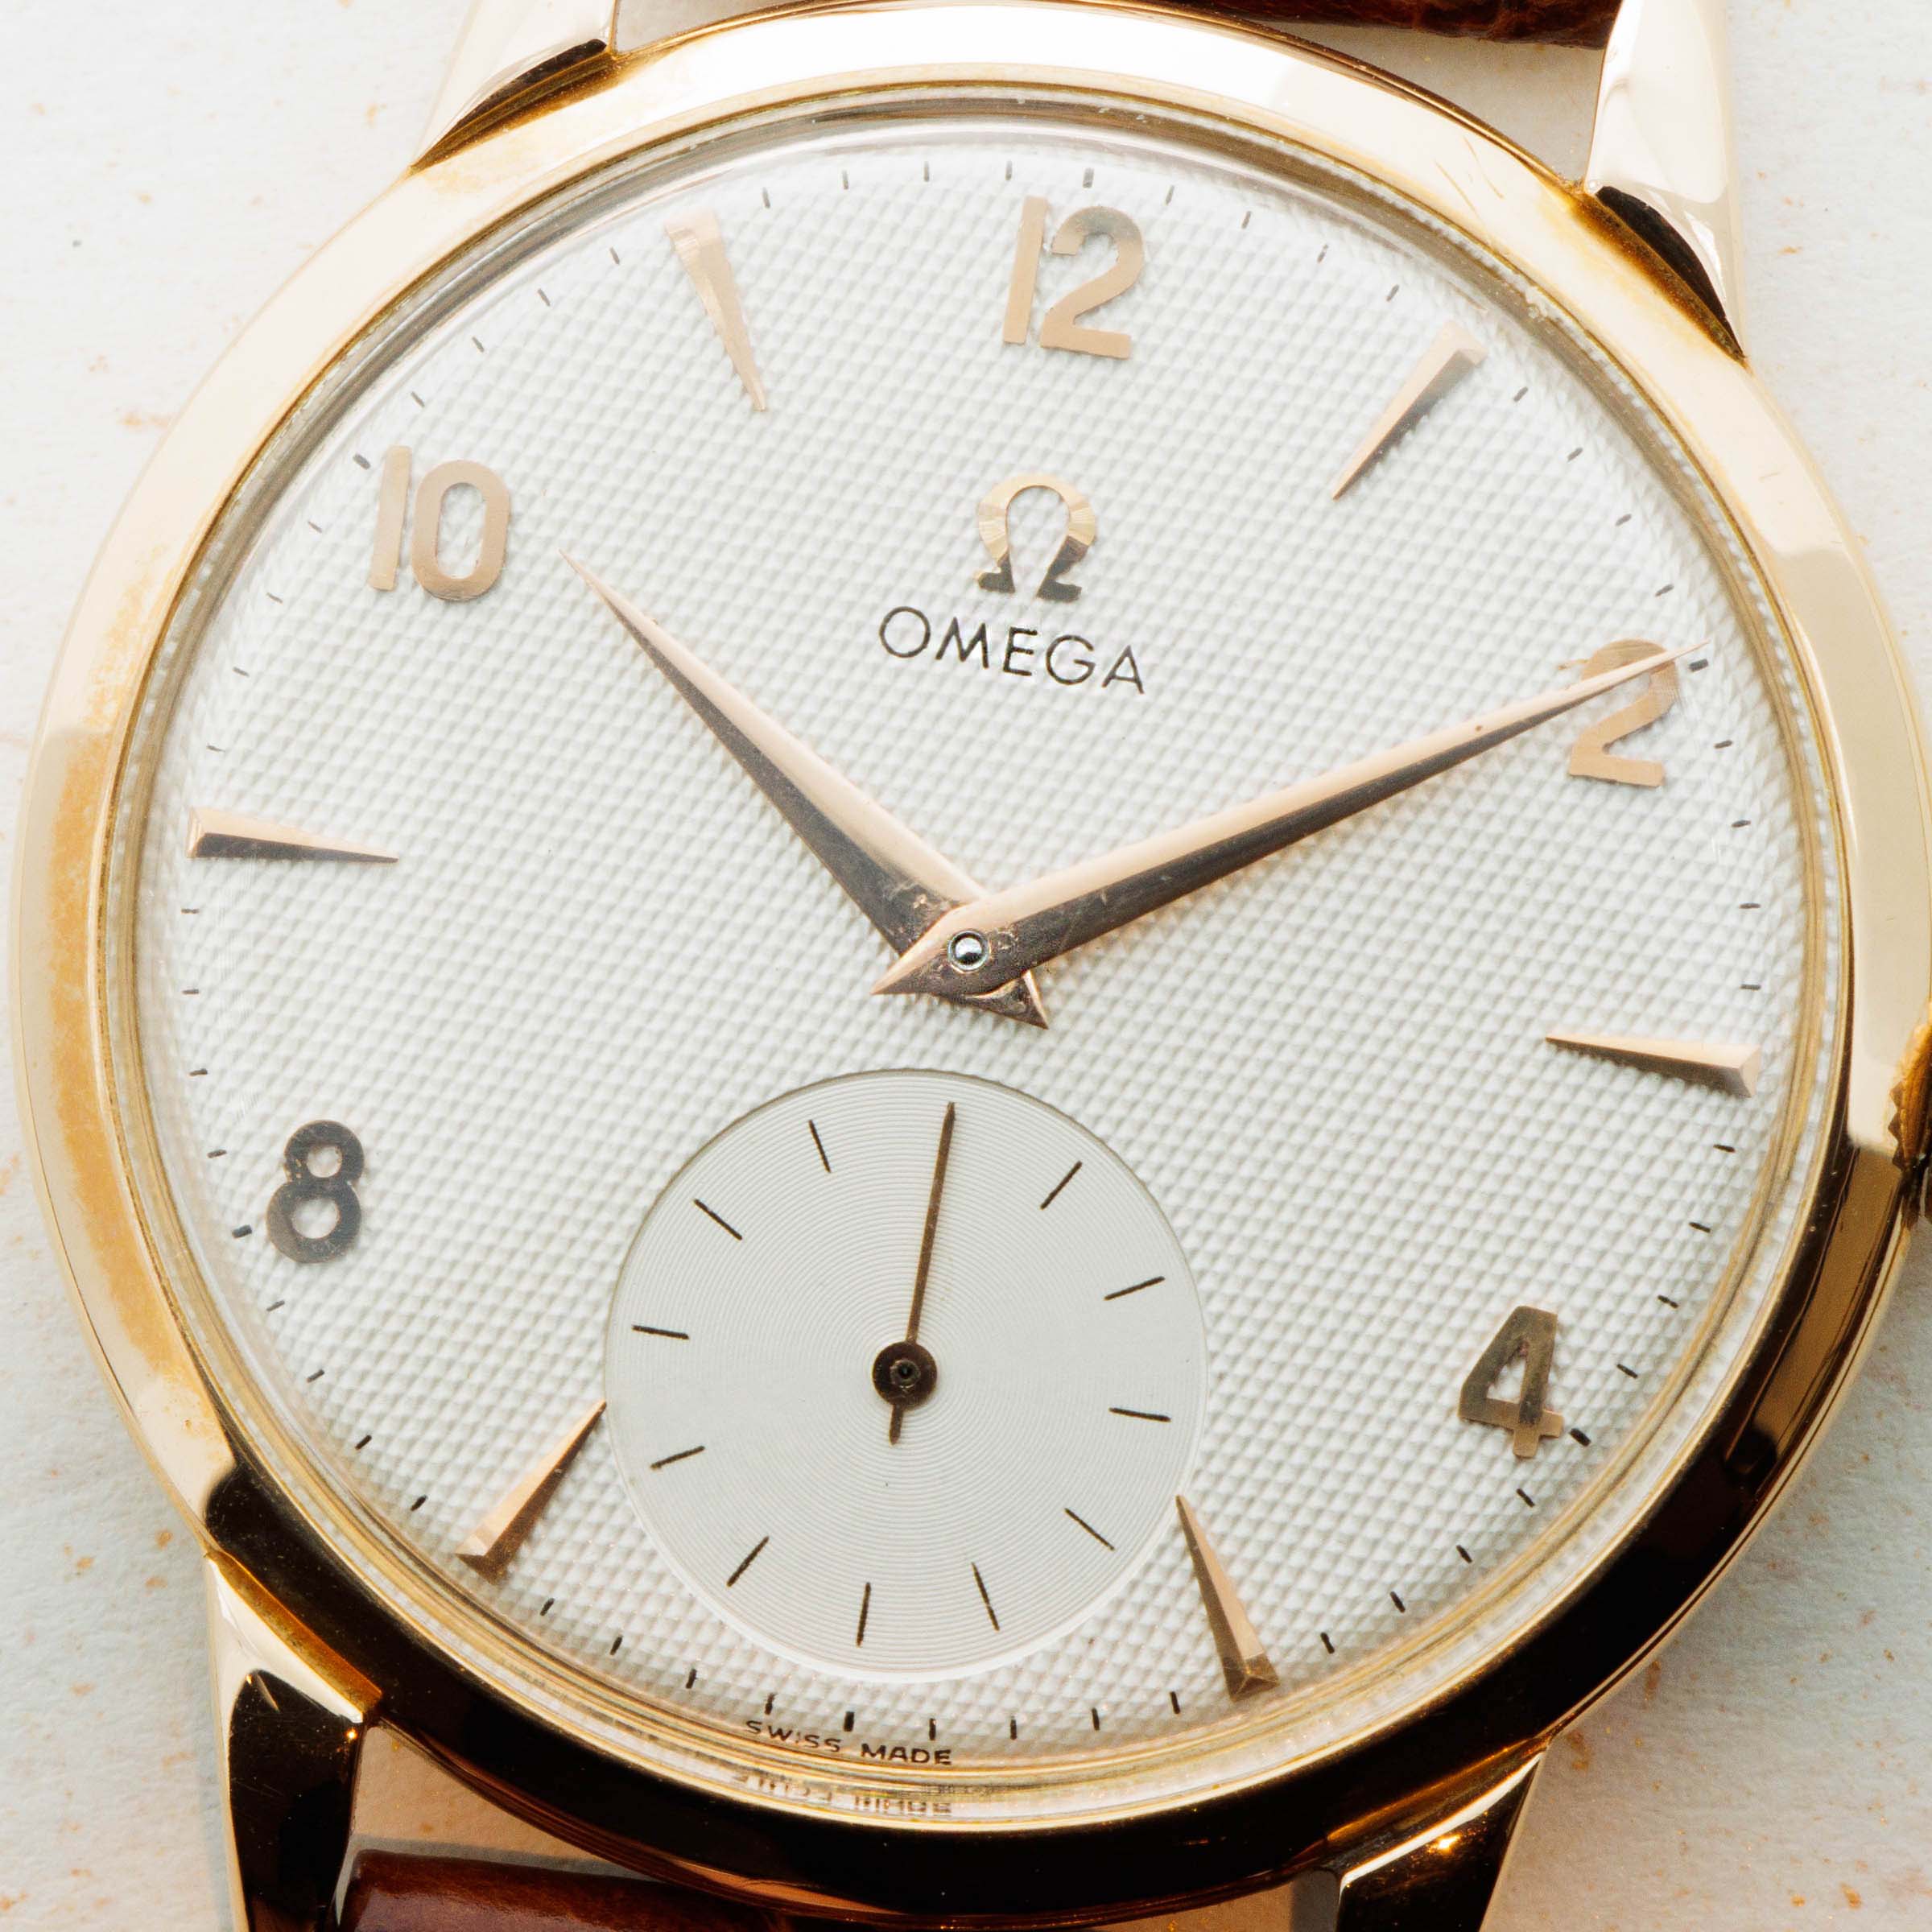 New Omega De Ville Tresor Watches with Domed Malachite Dials - Bob's Watches